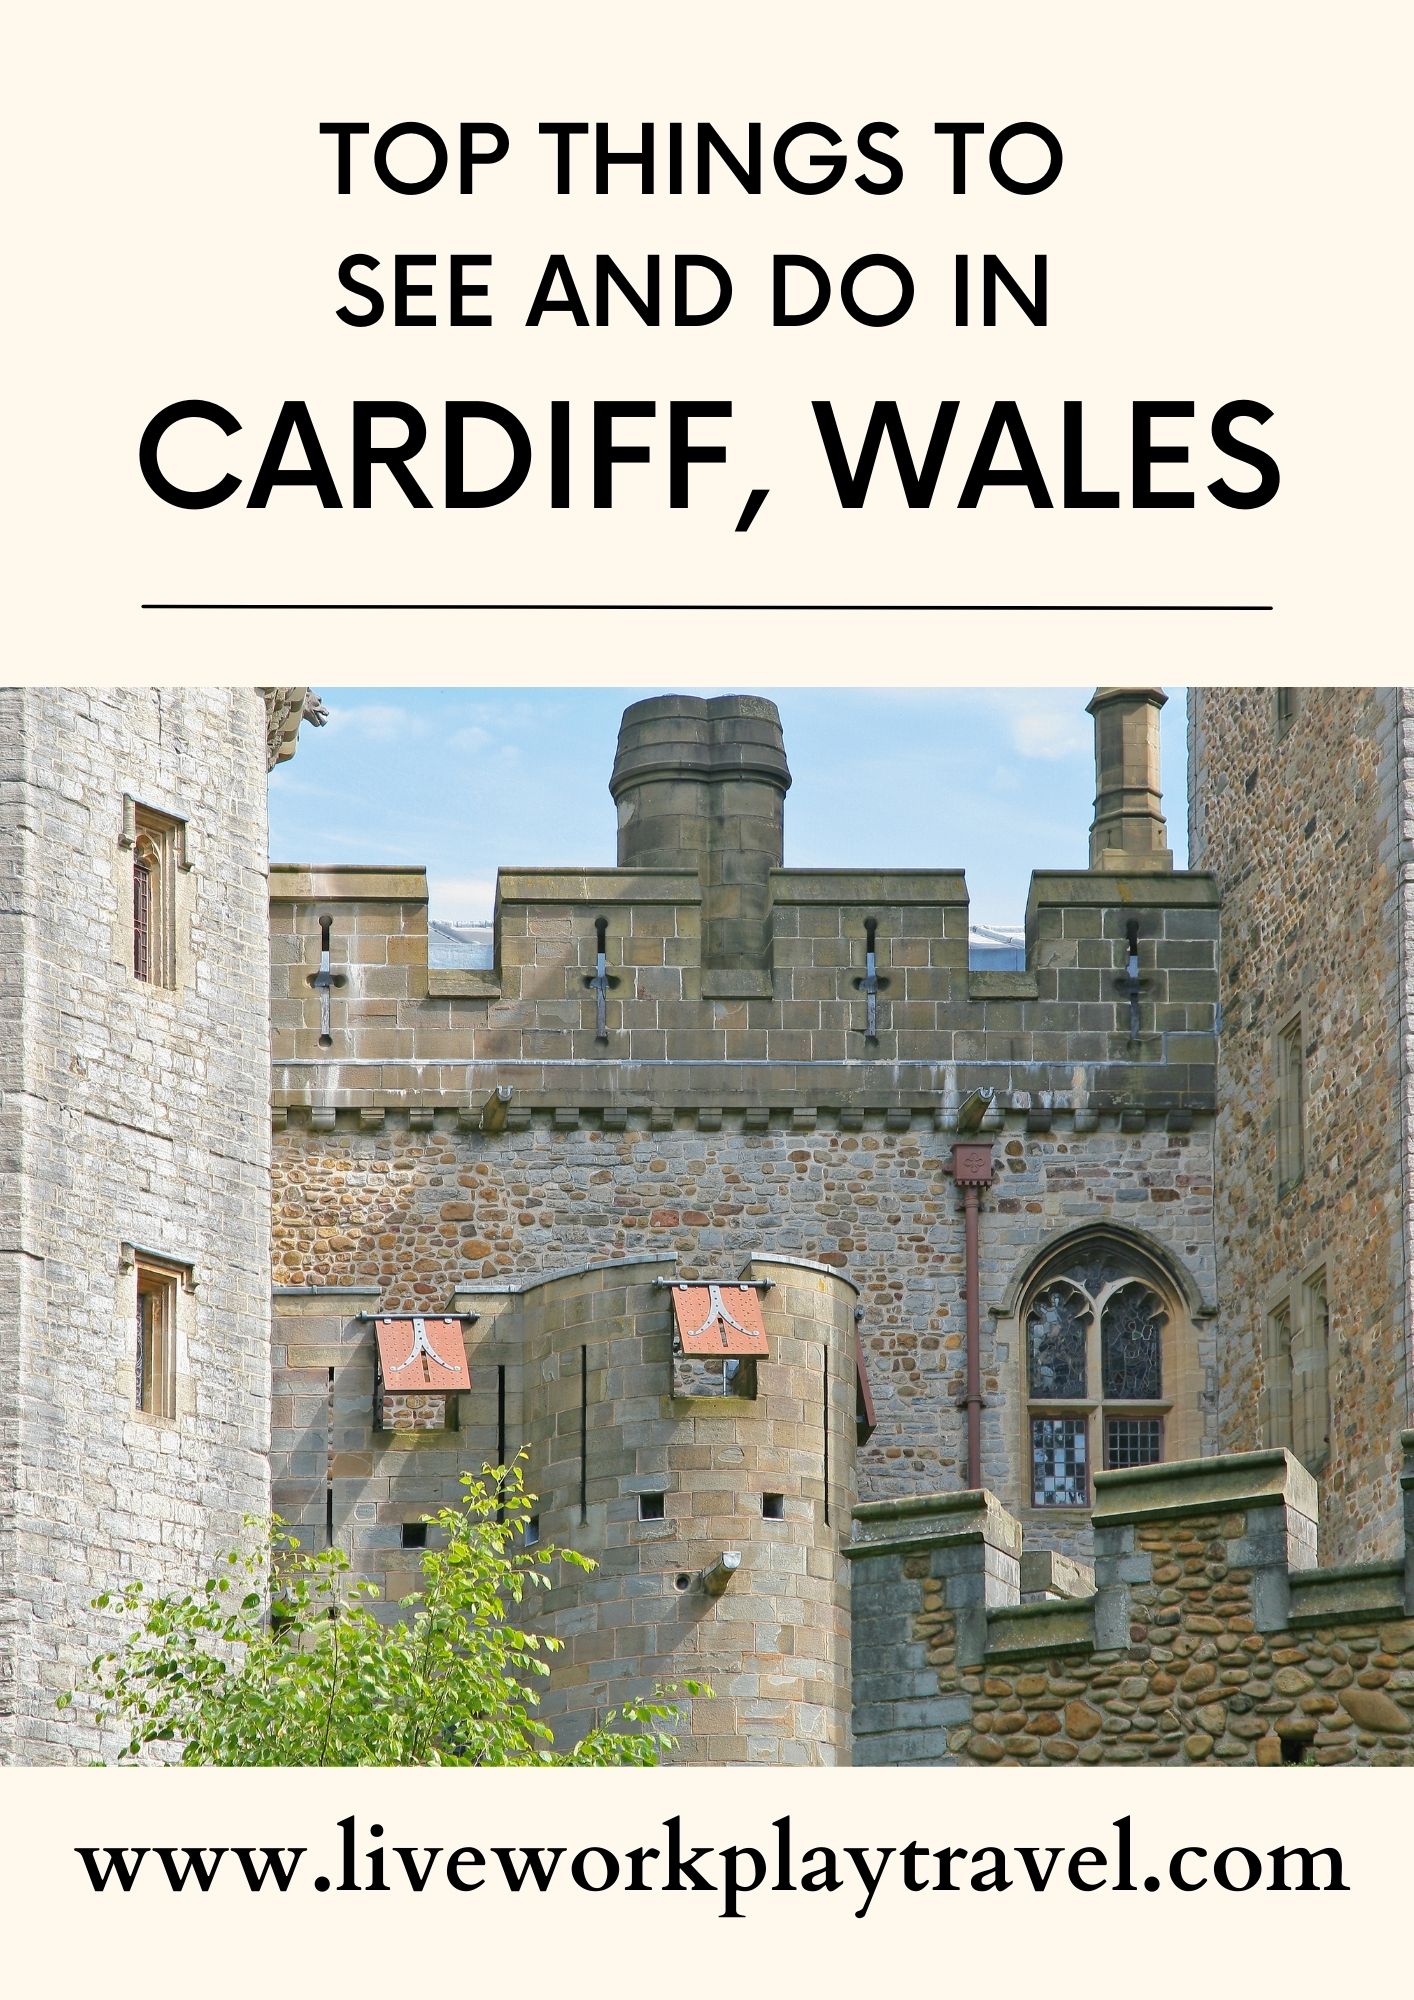 Cardiff Castle Is A Grey Castle Standing In The Middle of Cardiff, Wales.